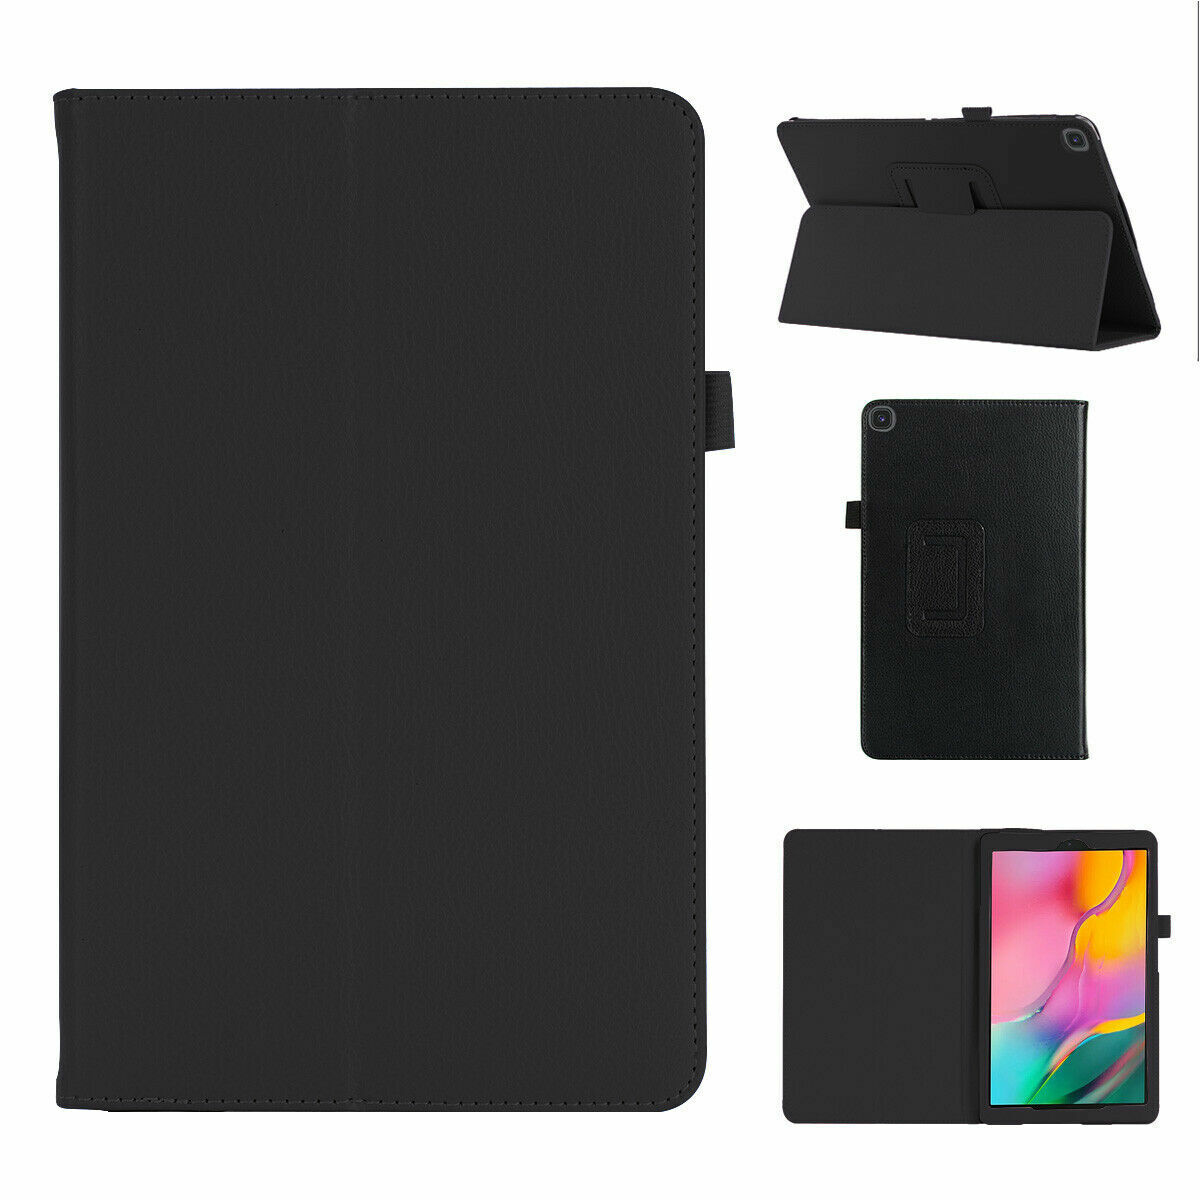 For Onn 8 inch Tablet Case Folding Stand Cover for Onn 8